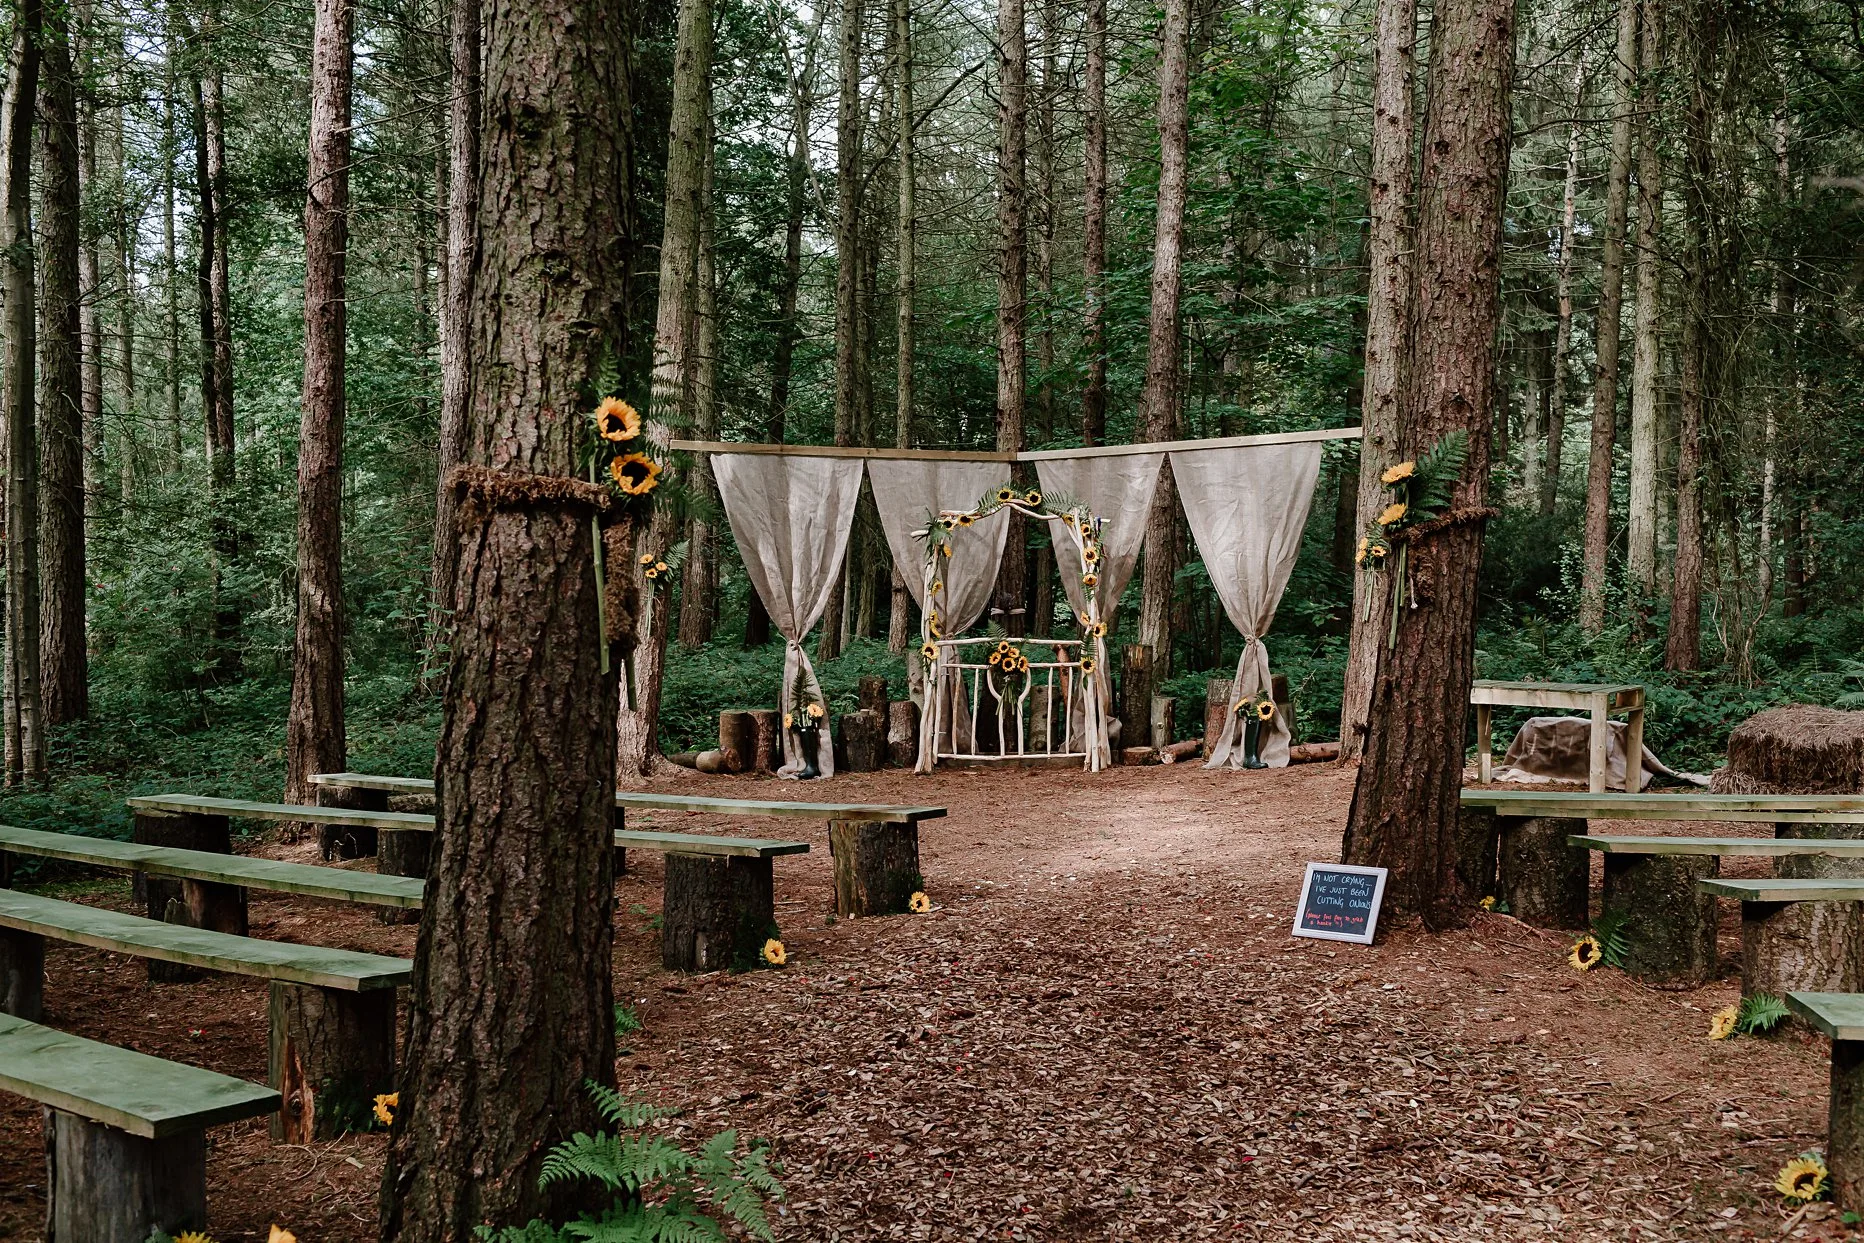 Ceremony space at Camp Katur. Outdoor wedding ceremony in the woods. The alter is decorated with yellow sunflowers and hessian drapes.